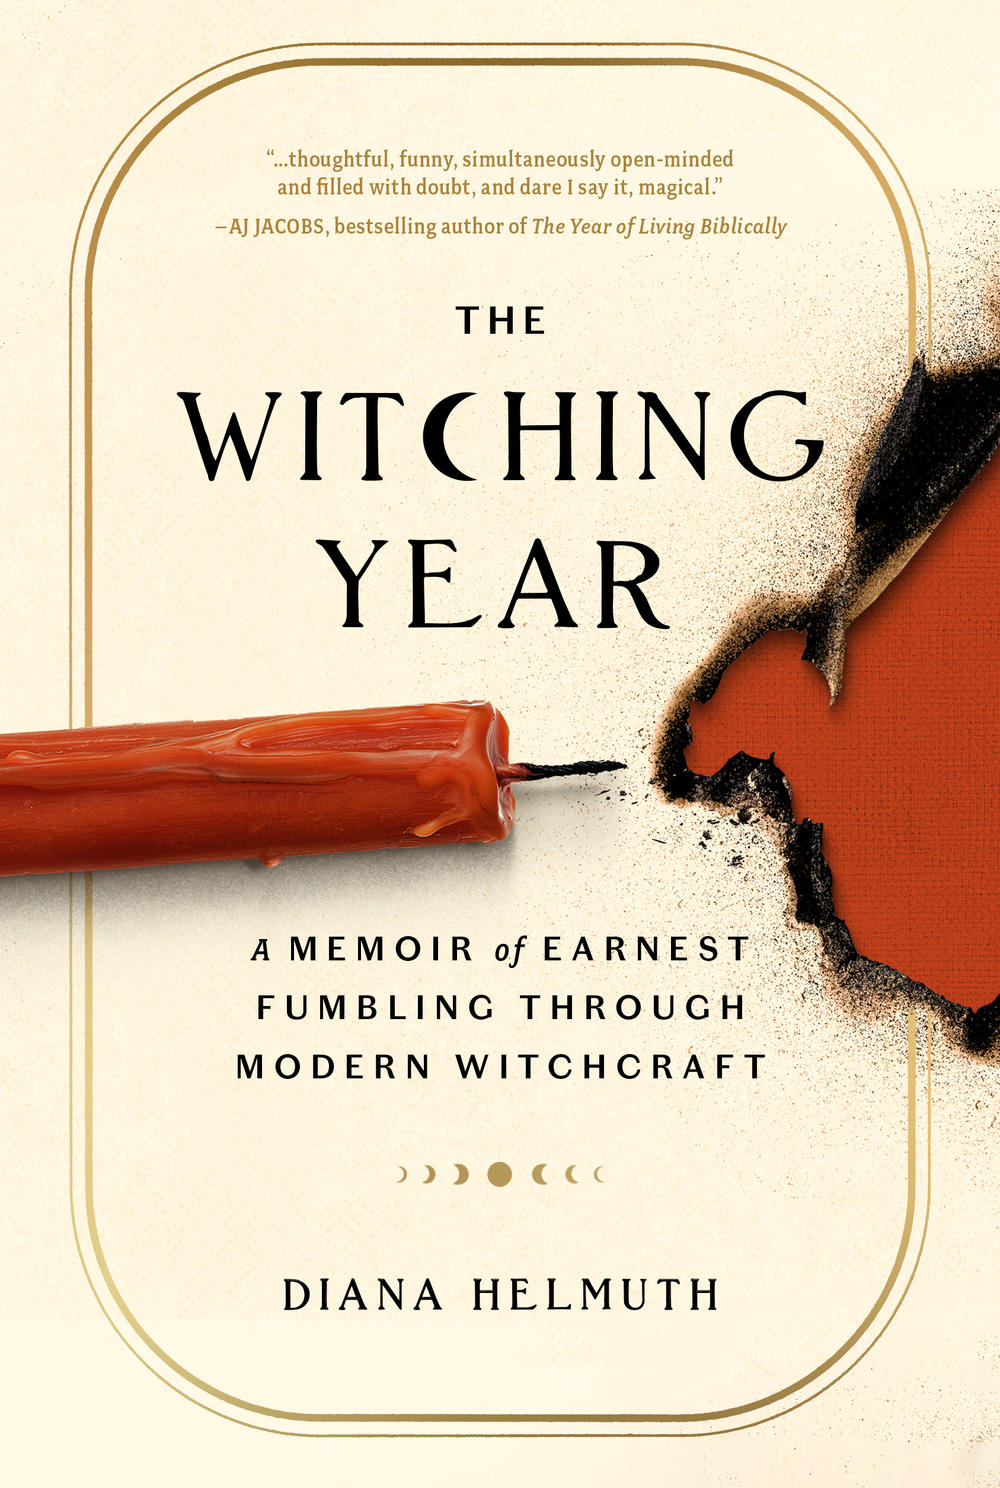 Helmuth's memoir details her spiritual journey, and the earnest fumbling she did along the way.